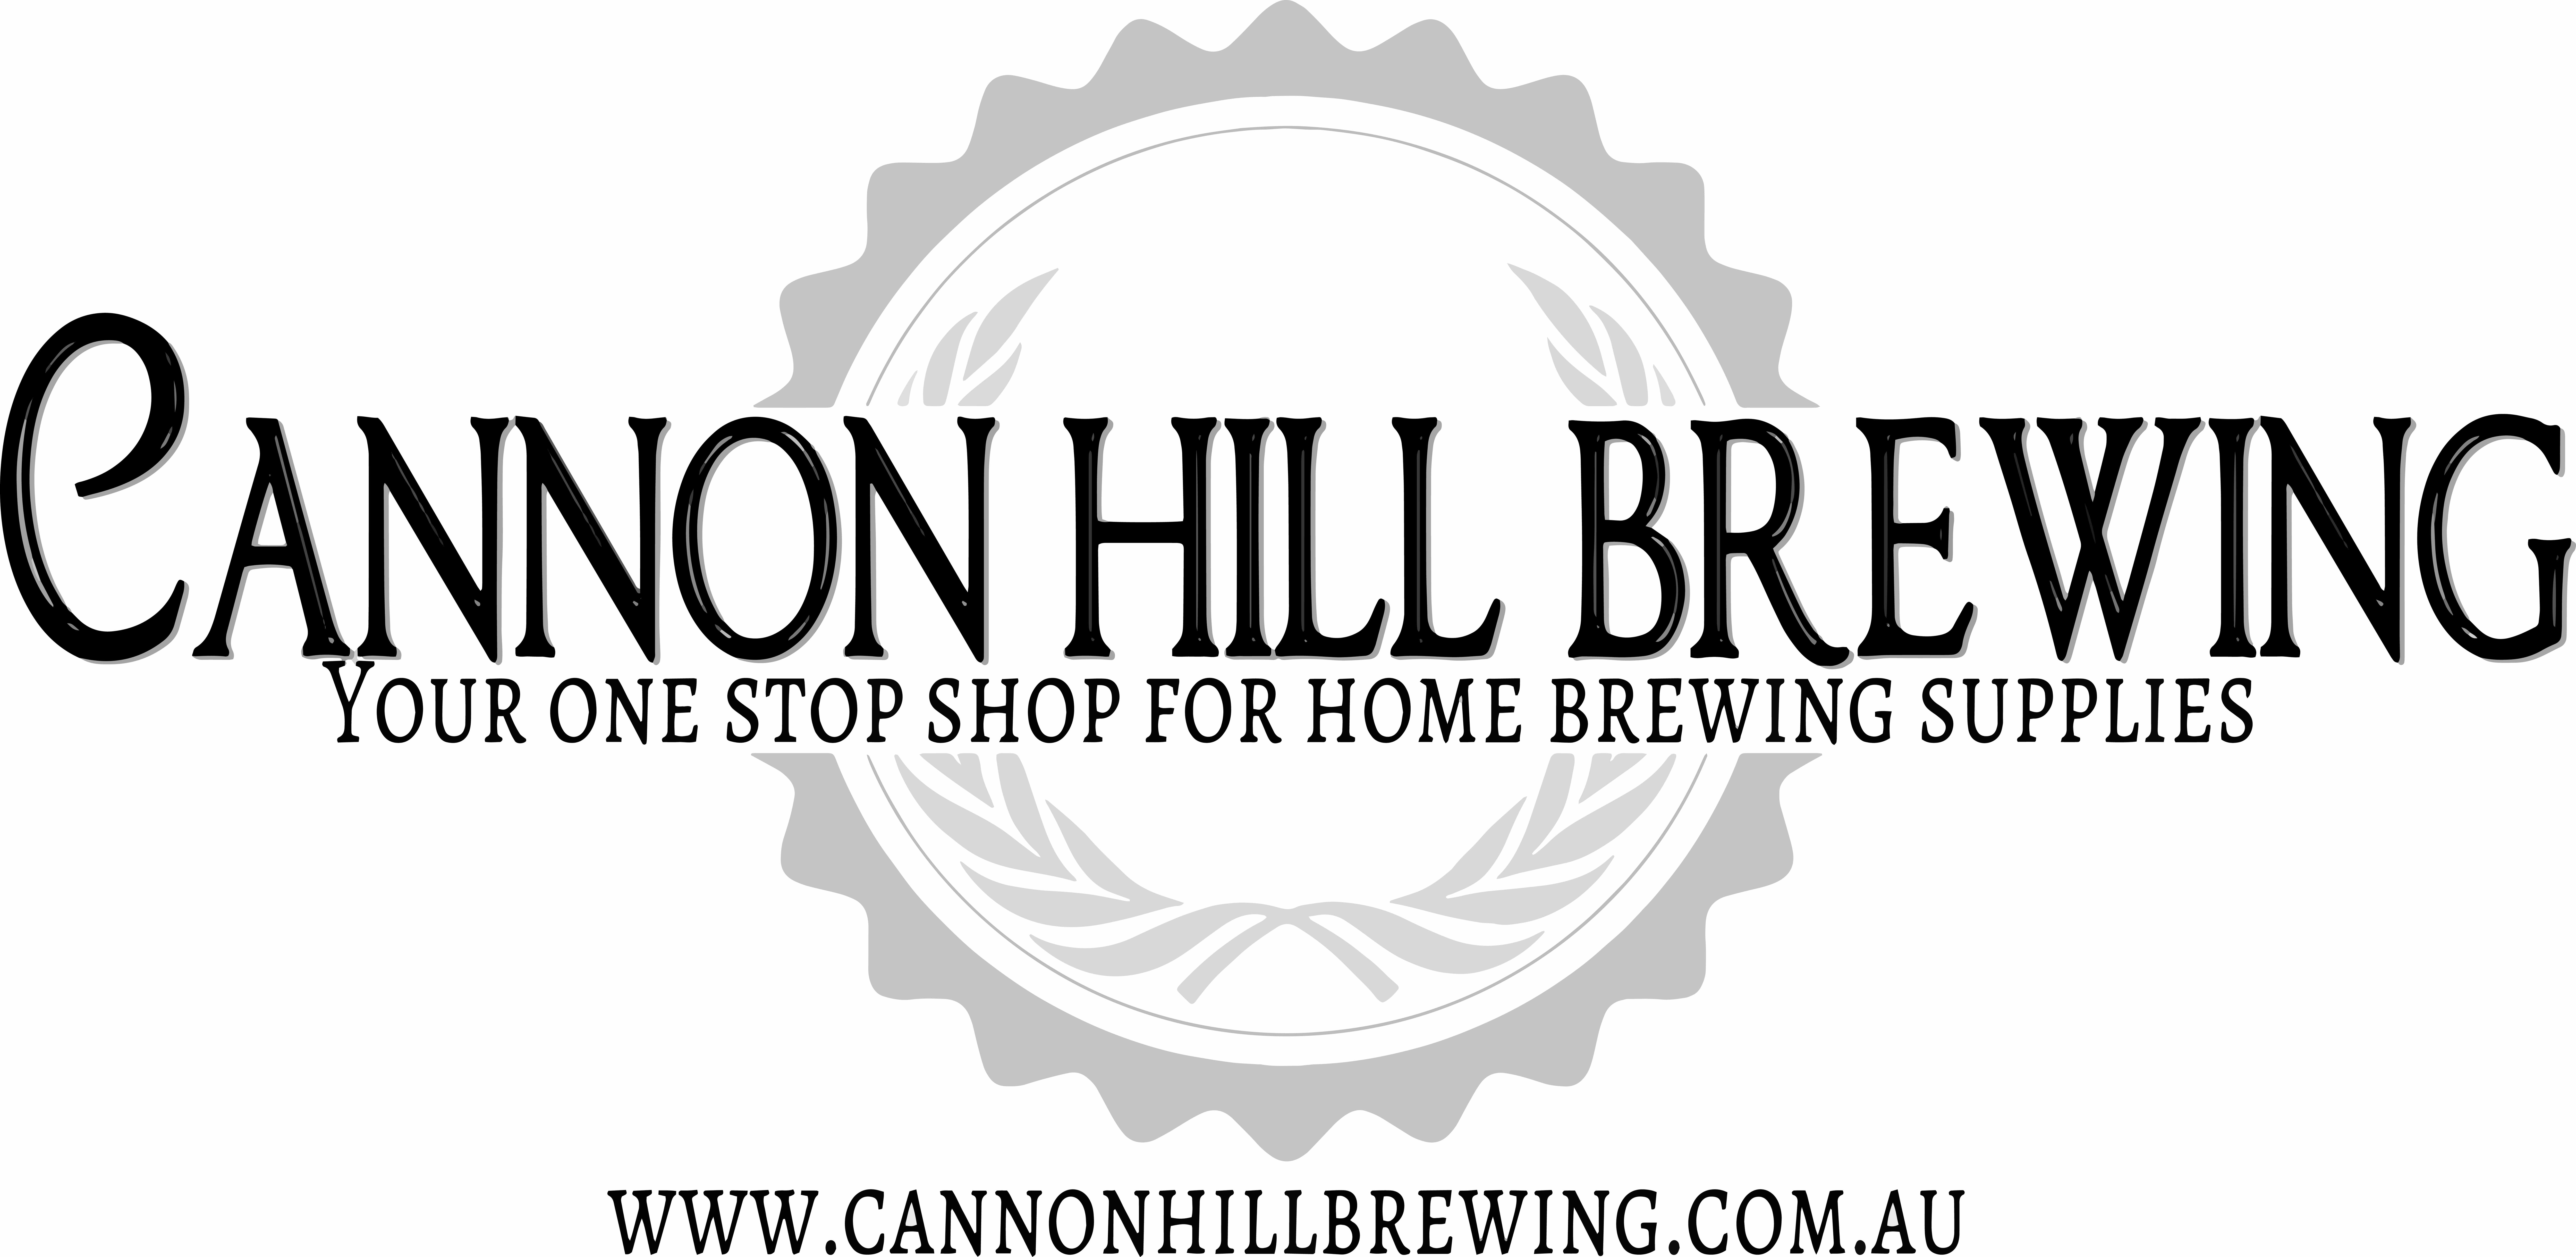 Cannon Hill Brewing